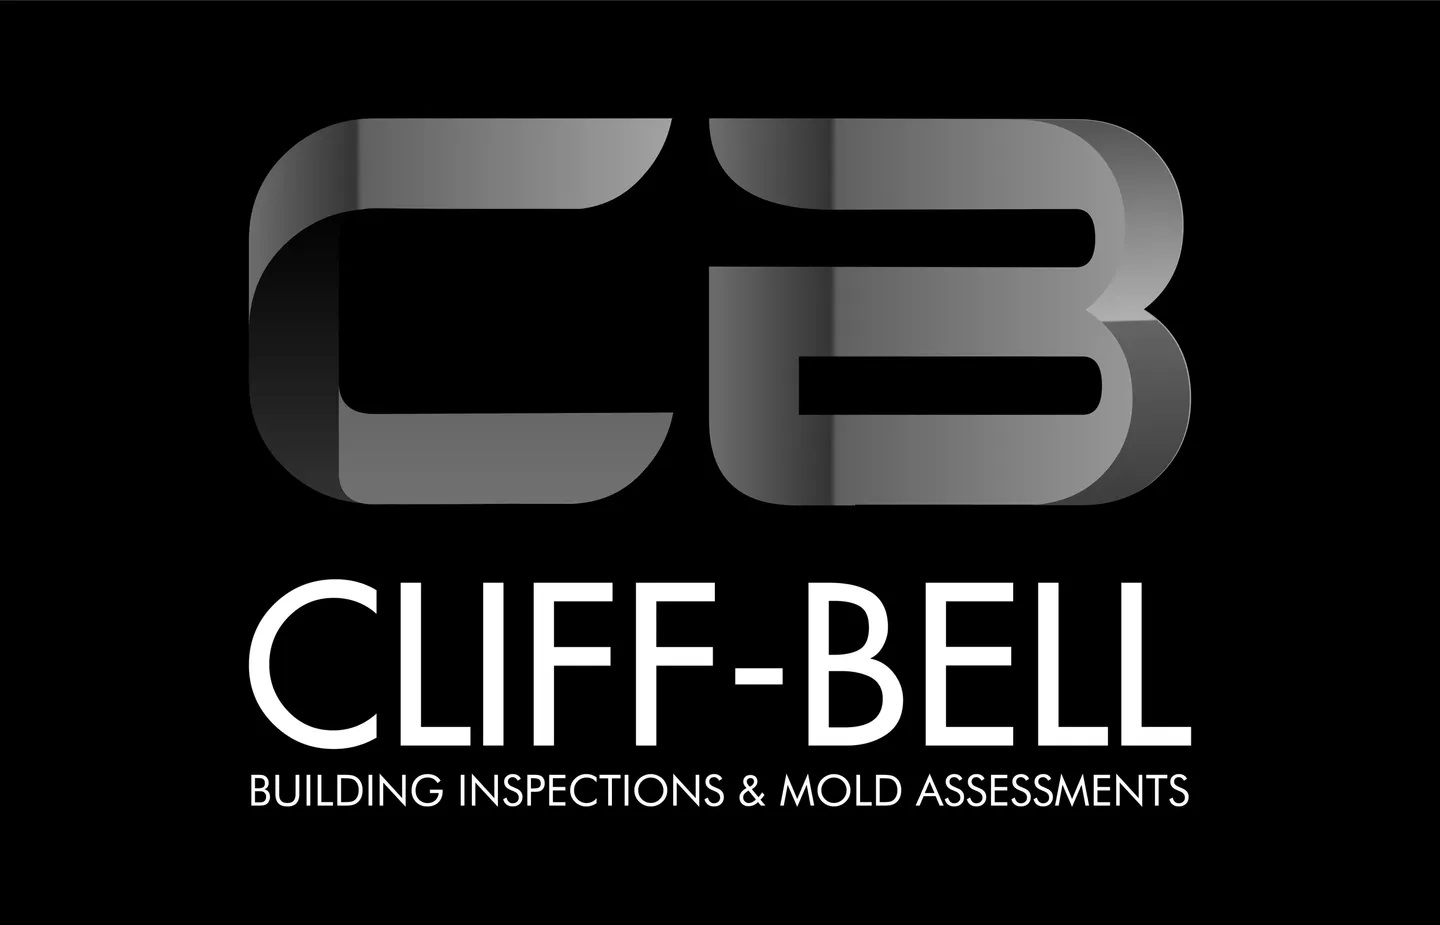 A black and white logo of cliff bell